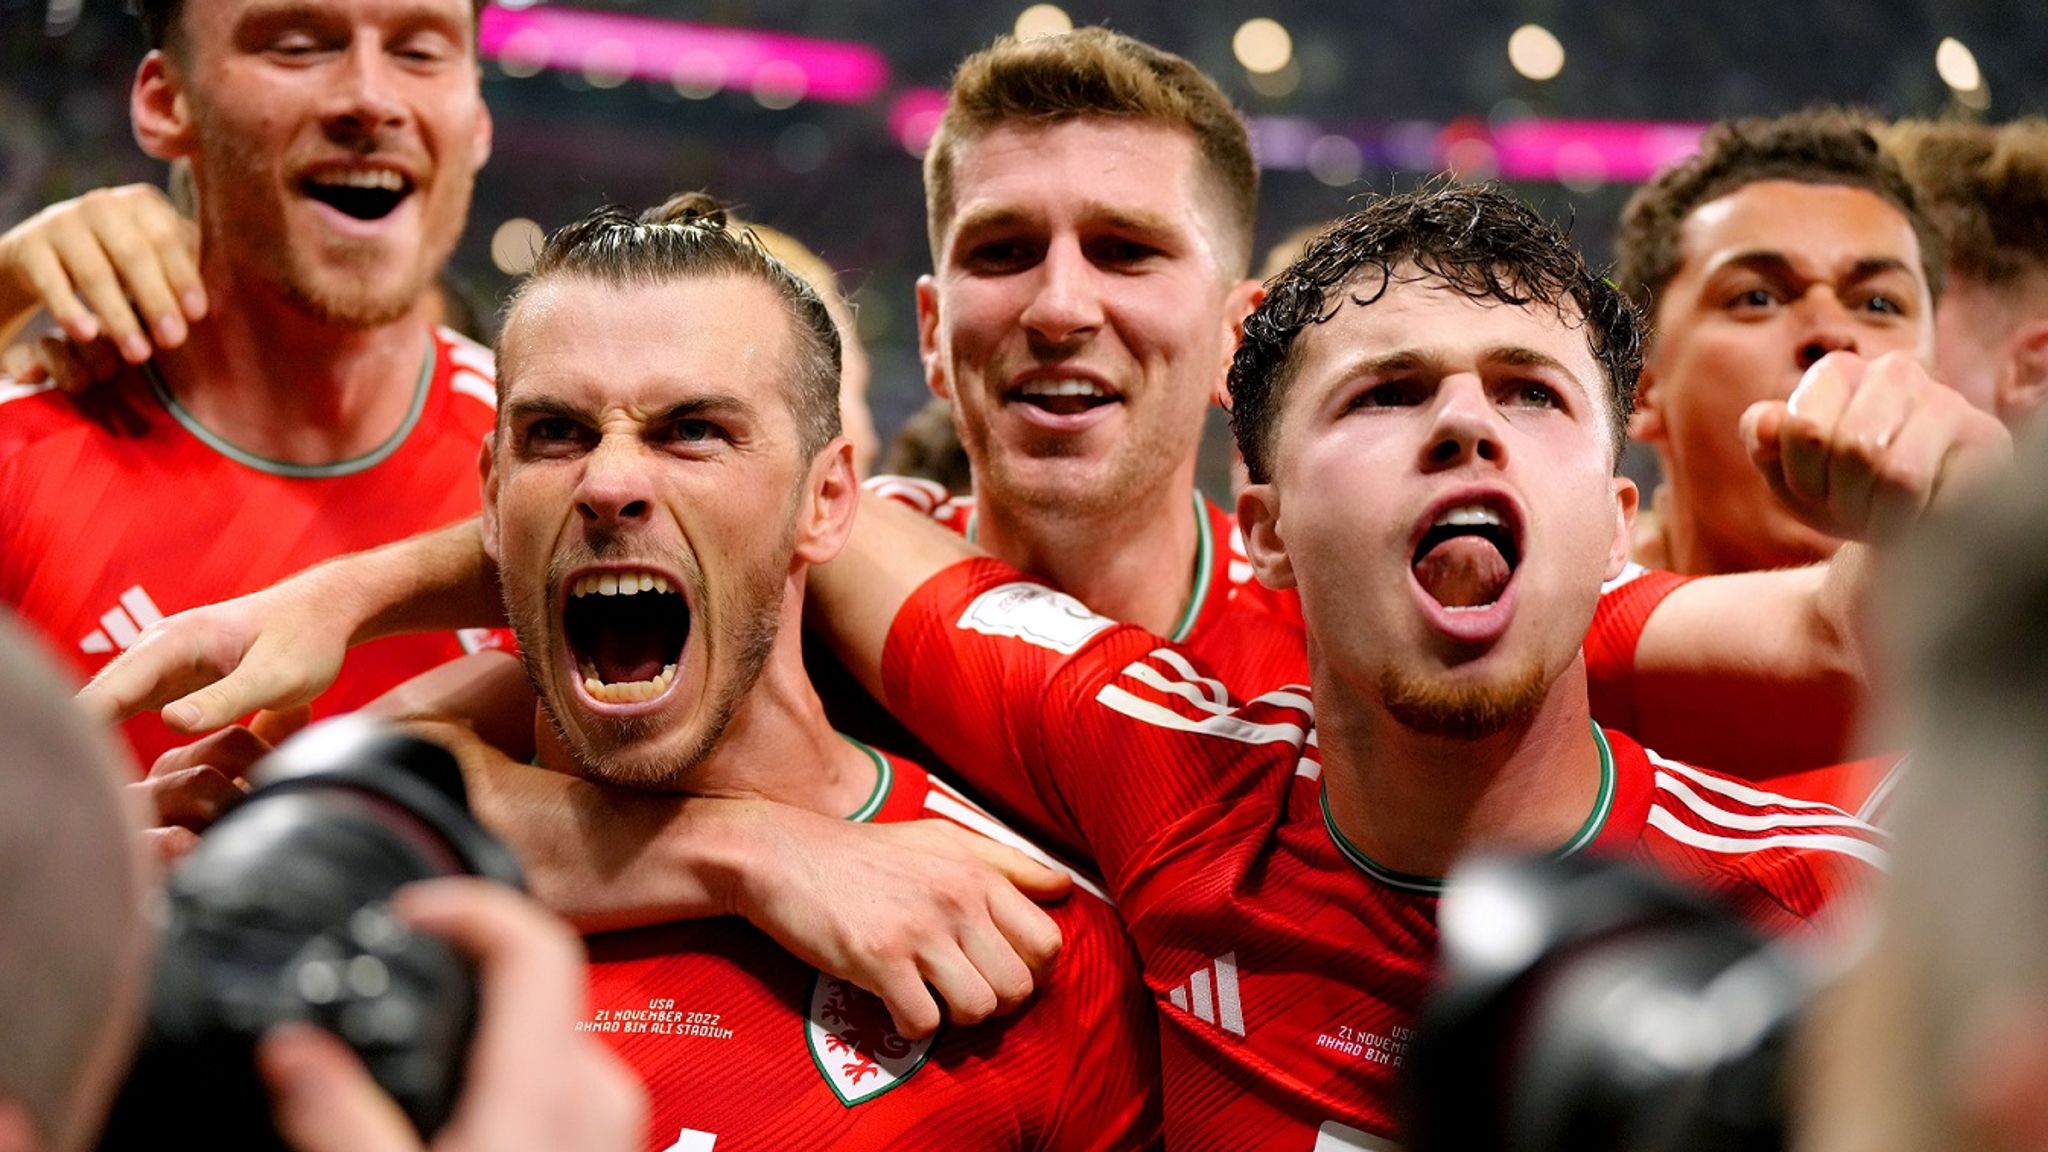 Wales' world cup campaign has ended in the group, I wanted them to